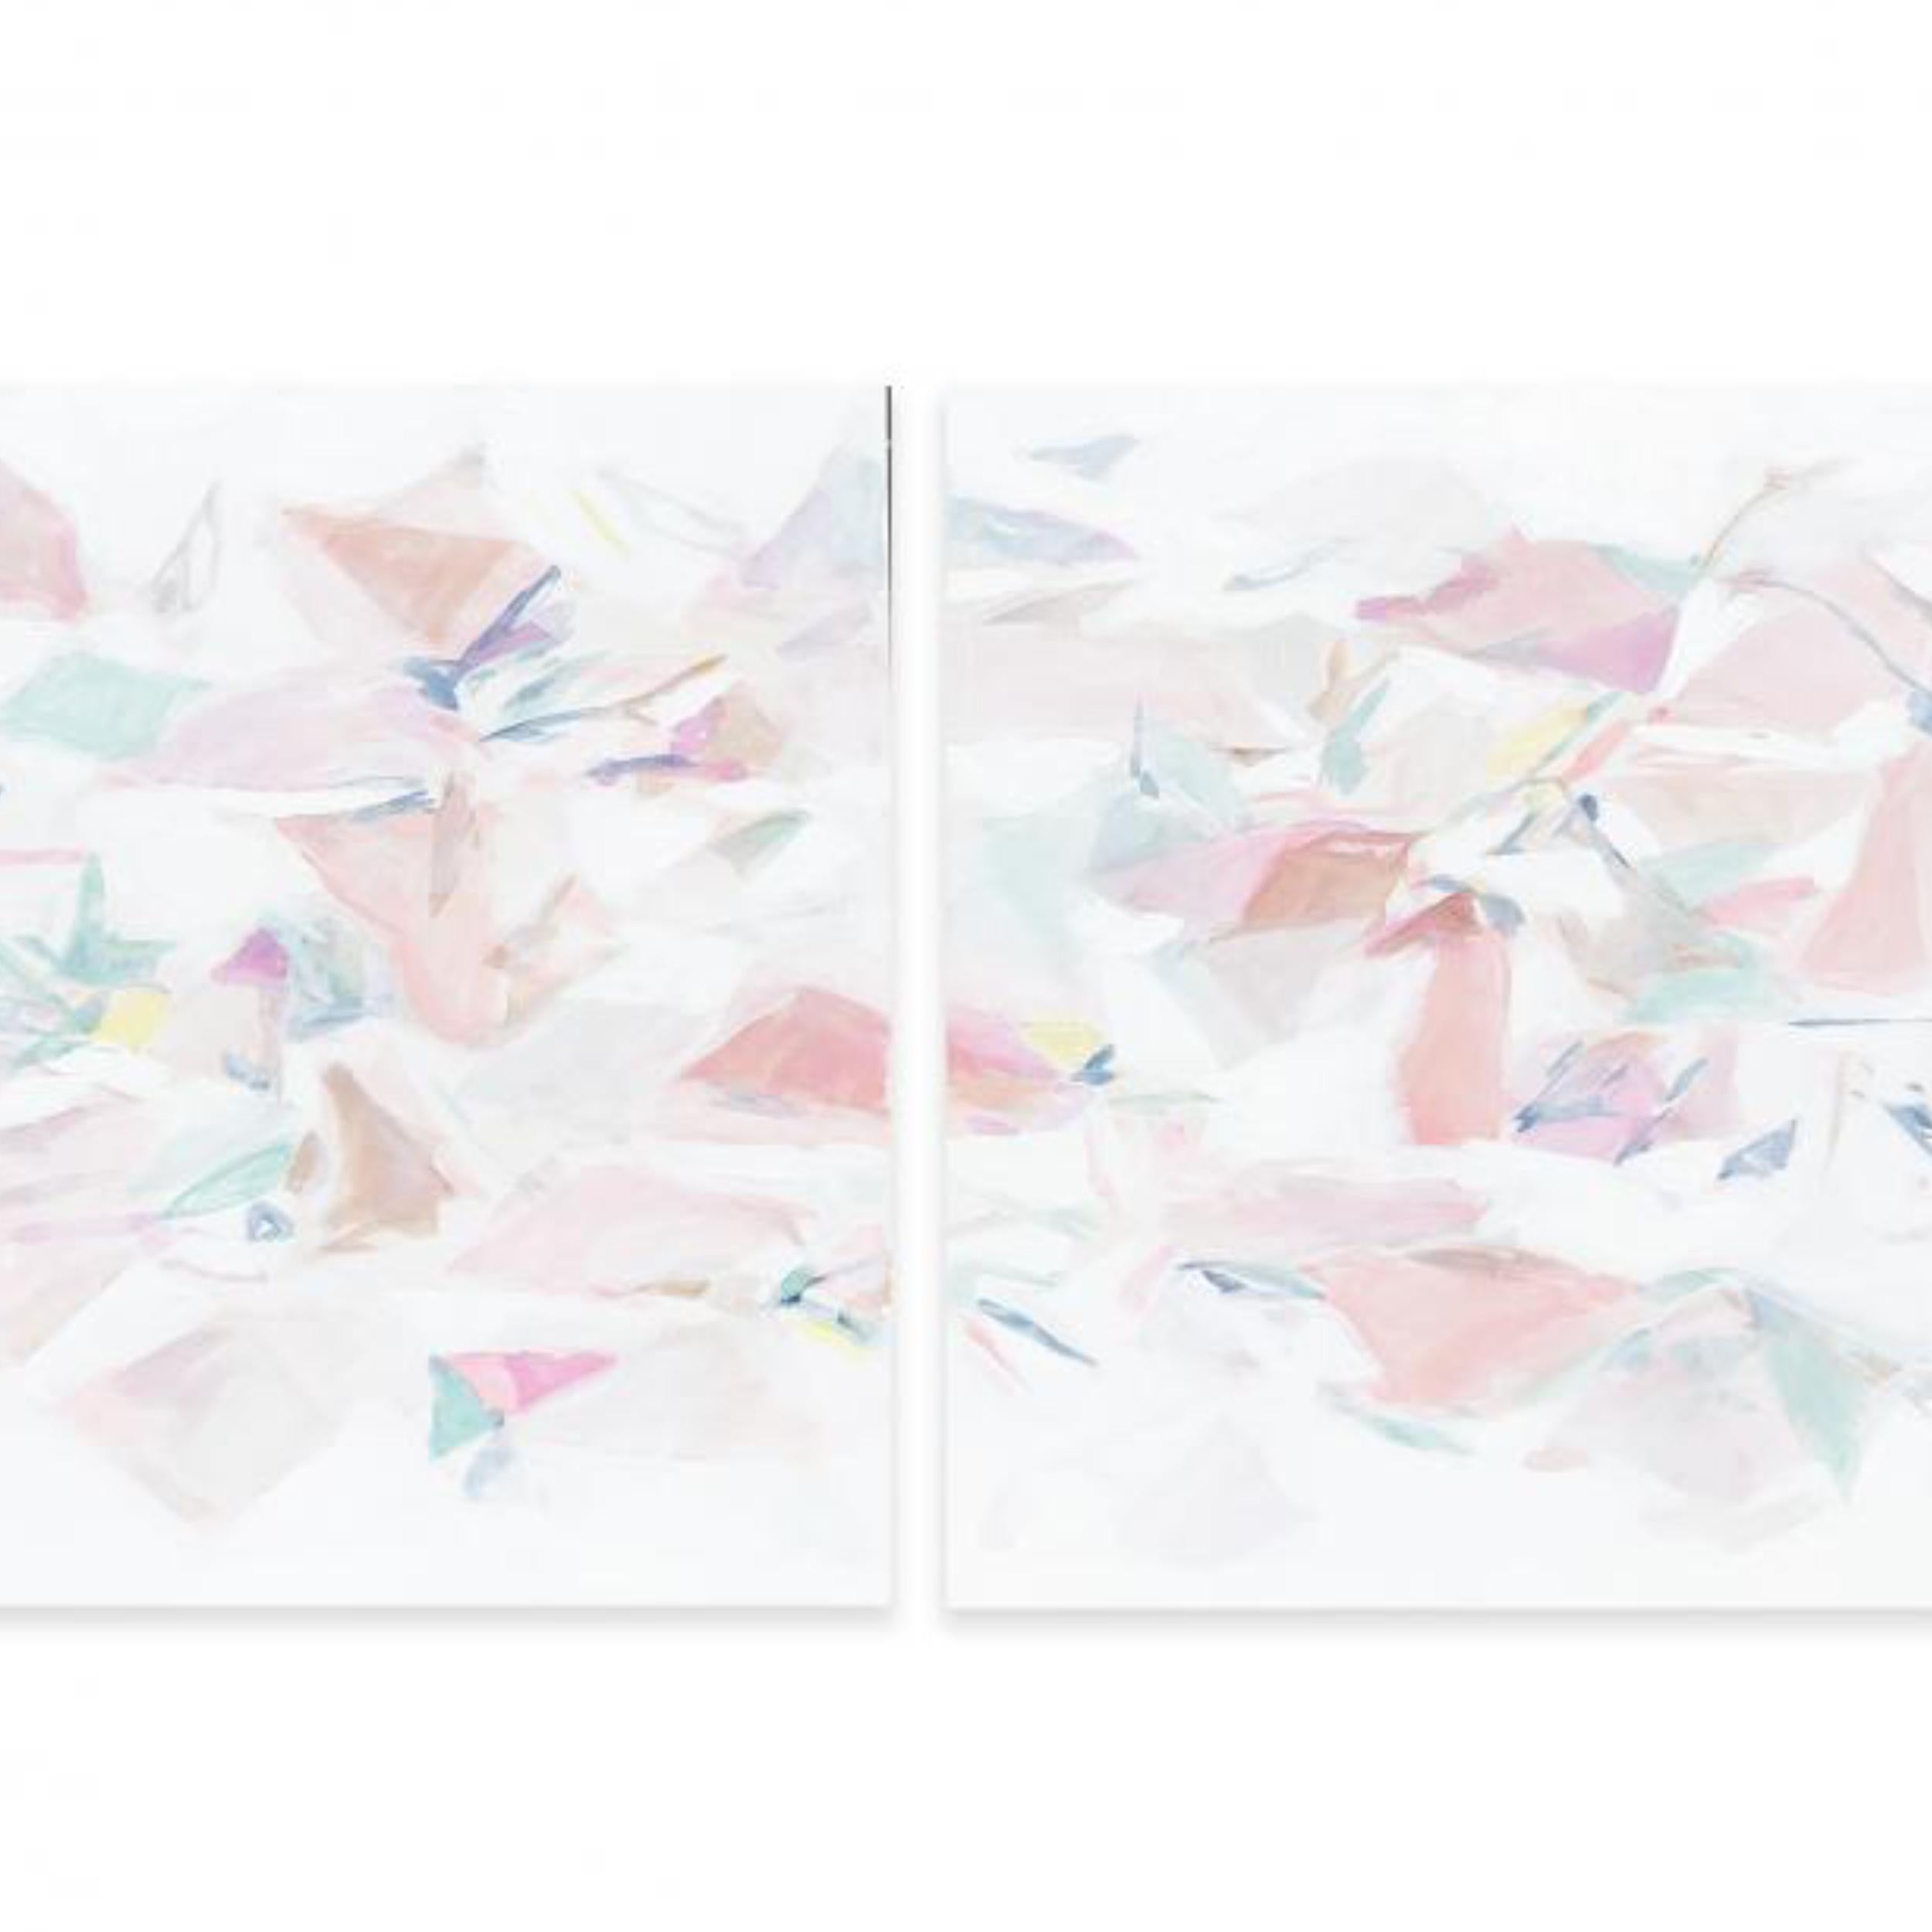 FALLING IV (DIPTYCH) - Painting by Taelor Fisher